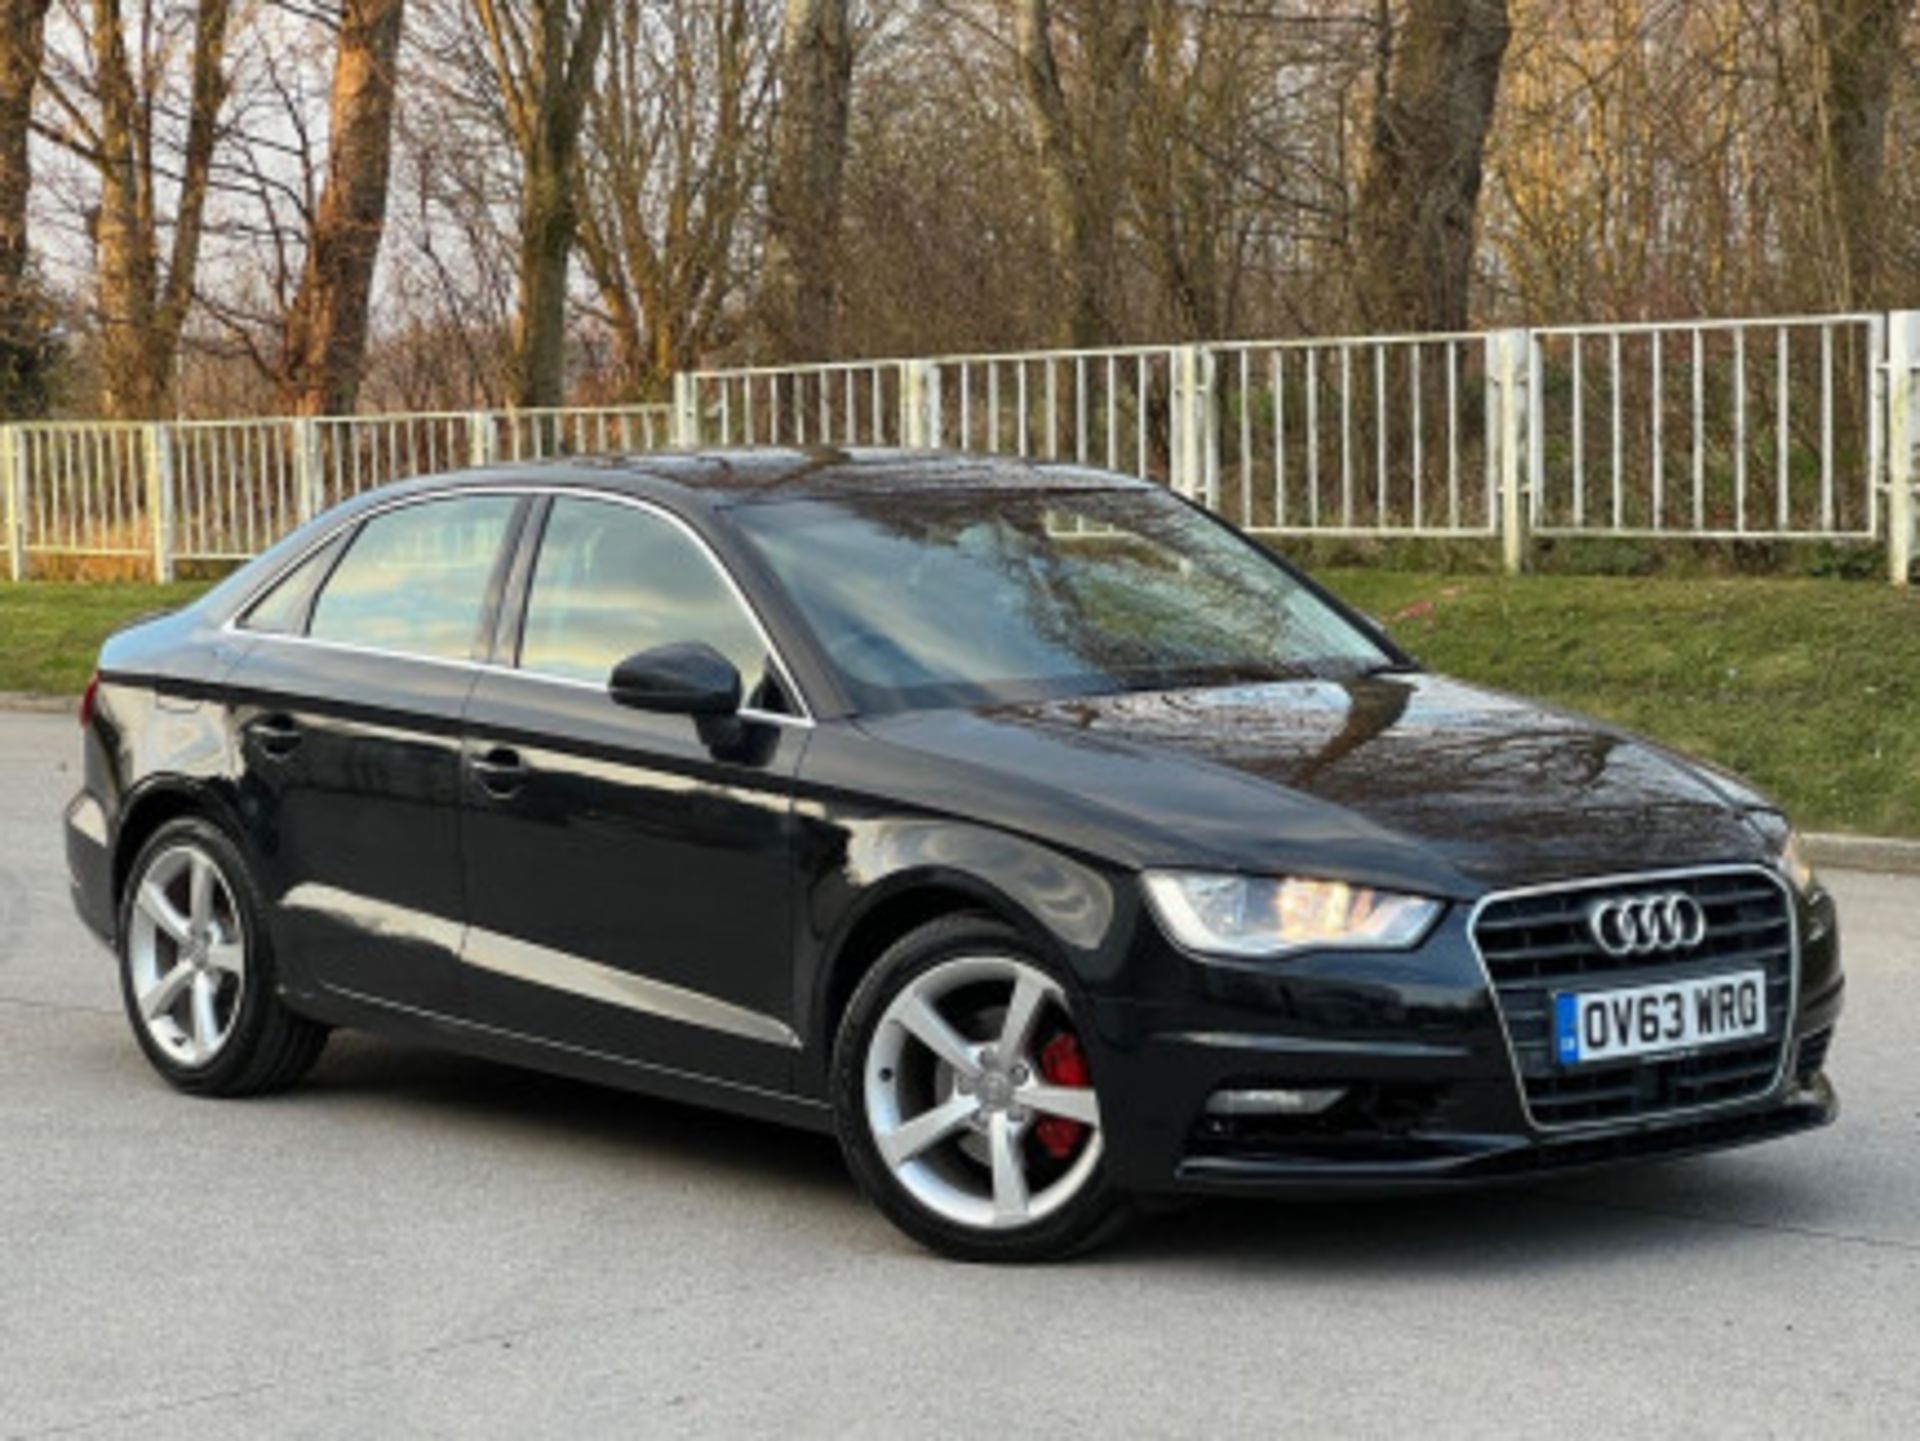 AUDI A3 2.0TDI SPORTBACK - STYLE, PERFORMANCE, AND COMFORT COMBINED >>--NO VAT ON HAMMER--<< - Image 80 of 216